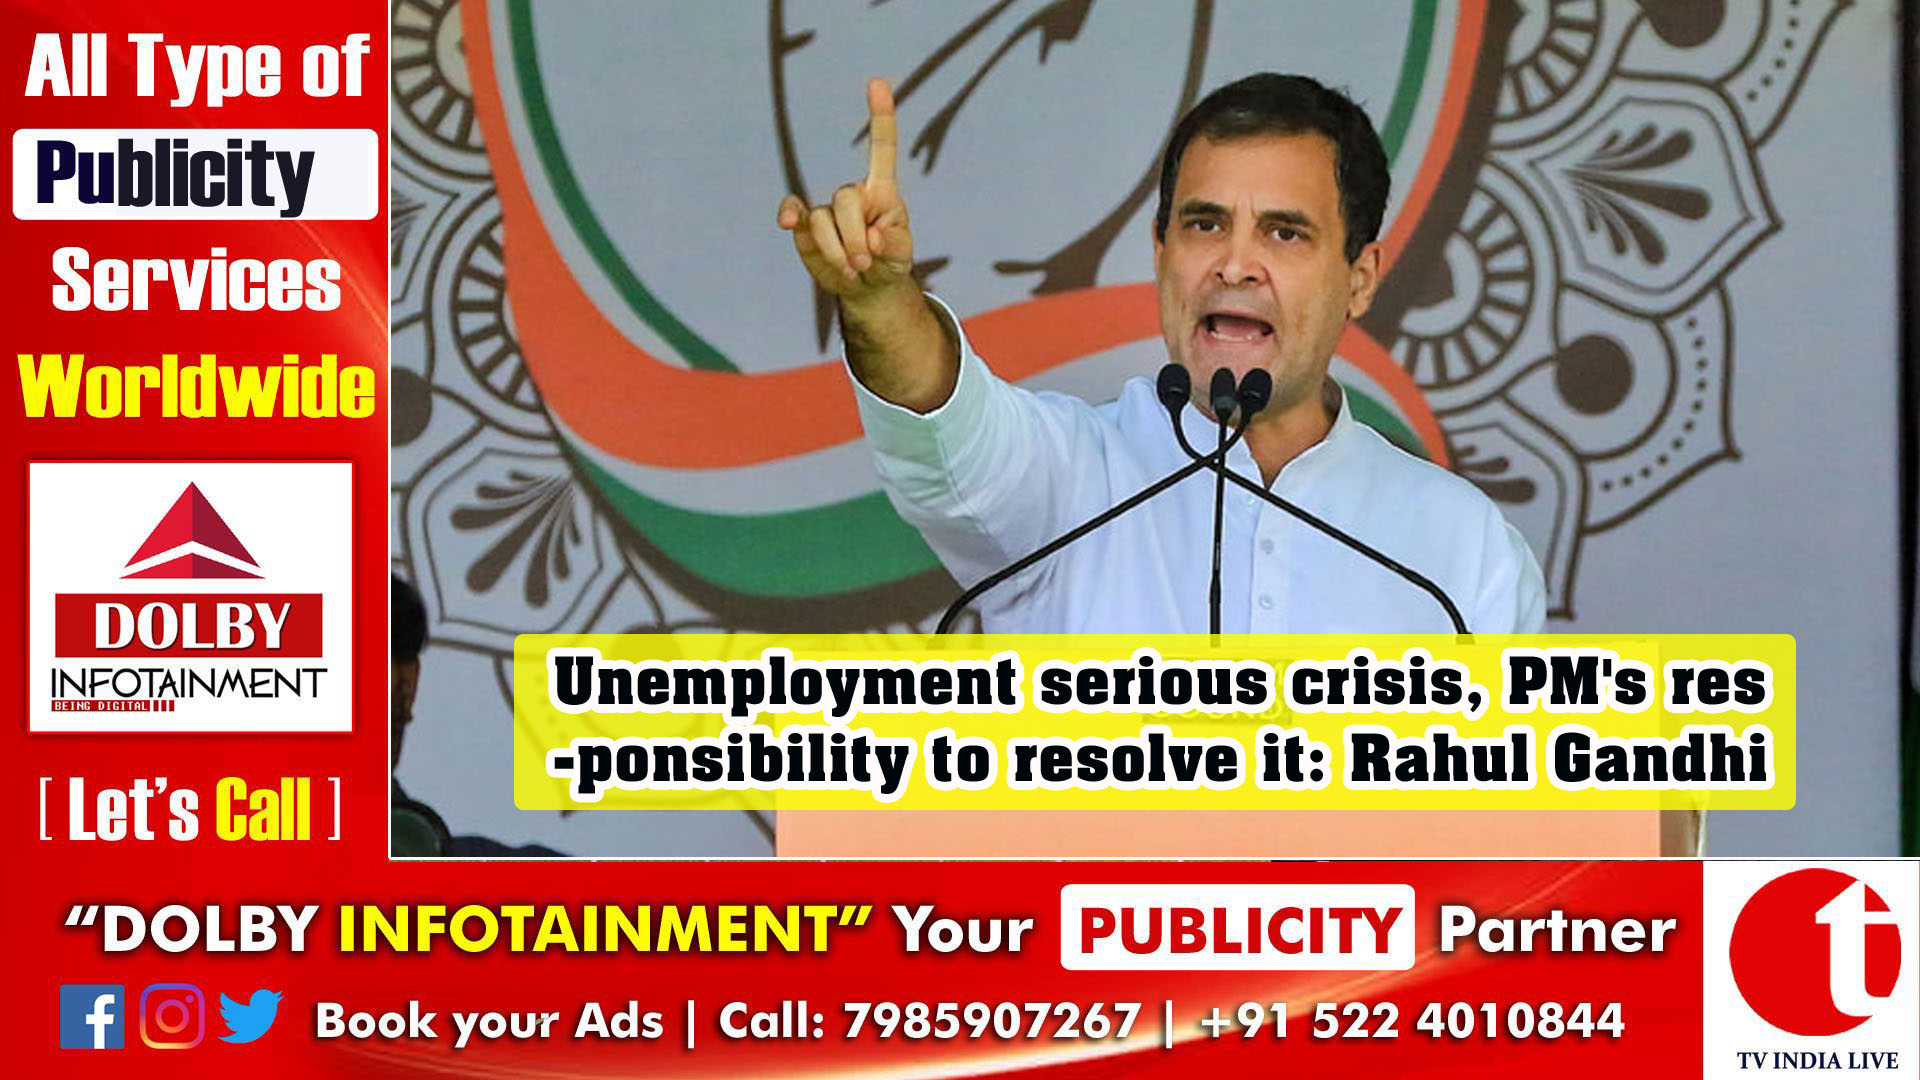 Unemployment serious crisis, PM's responsibility to resolve it: Rahul Gandhi